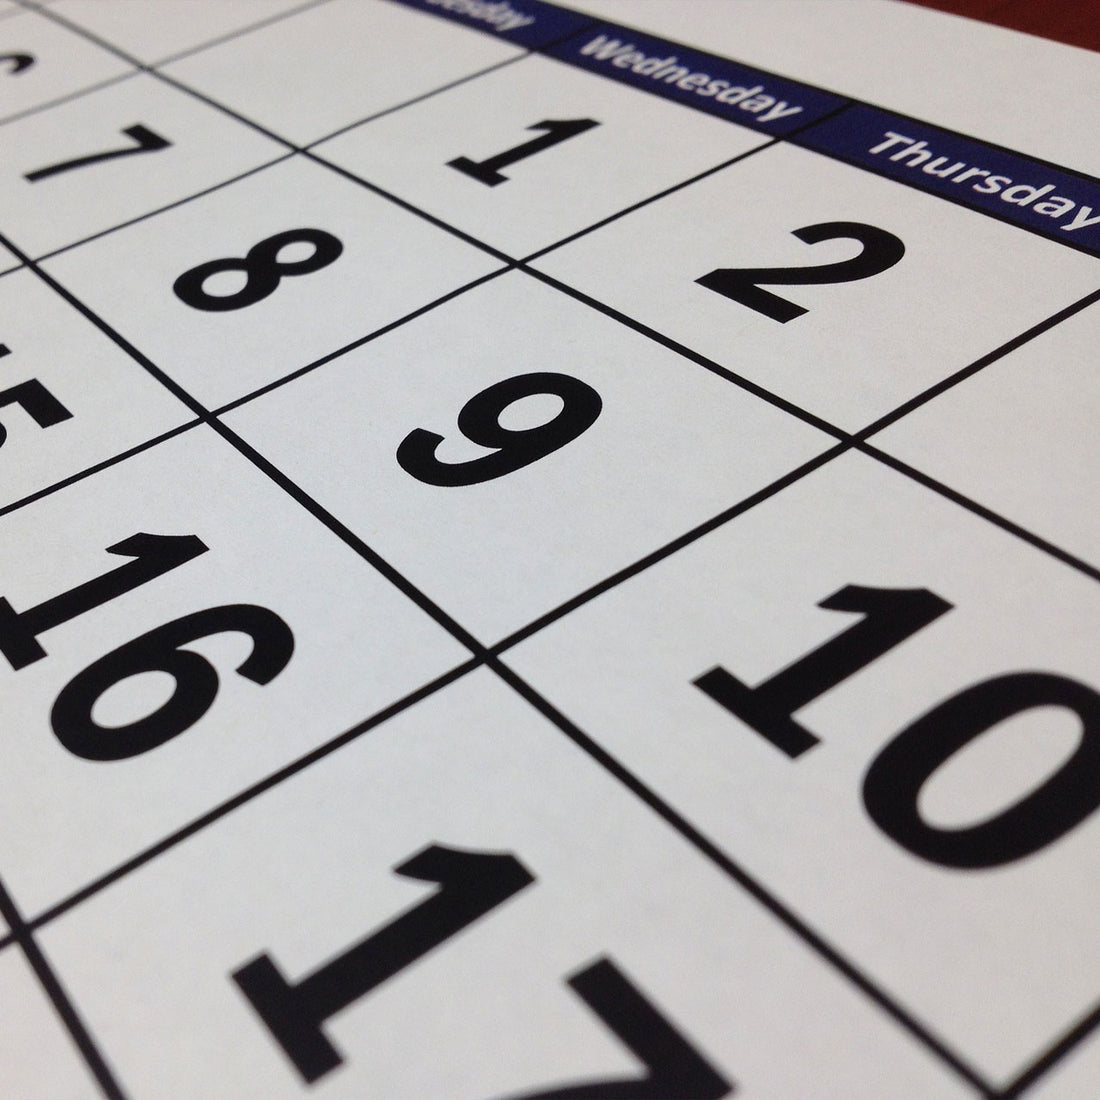 Planning Your Content With a Marketing Calendar